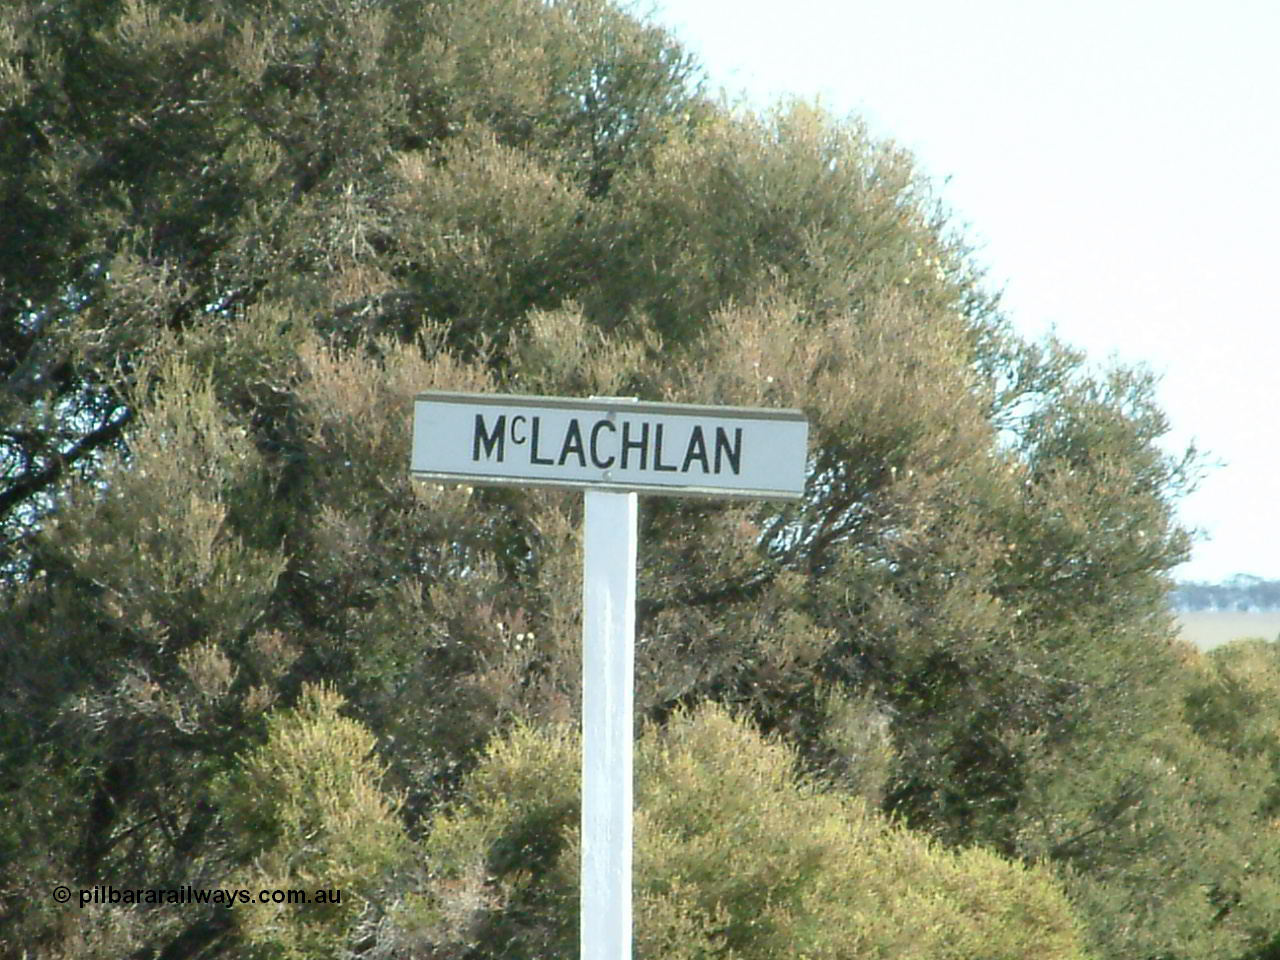 030405 153219
McLachlan, station located at the 156 km, originally opened in September 1914 and called 97 Miles till 1915, closed in August 1972, modern location signpost, 5th April 2003.
